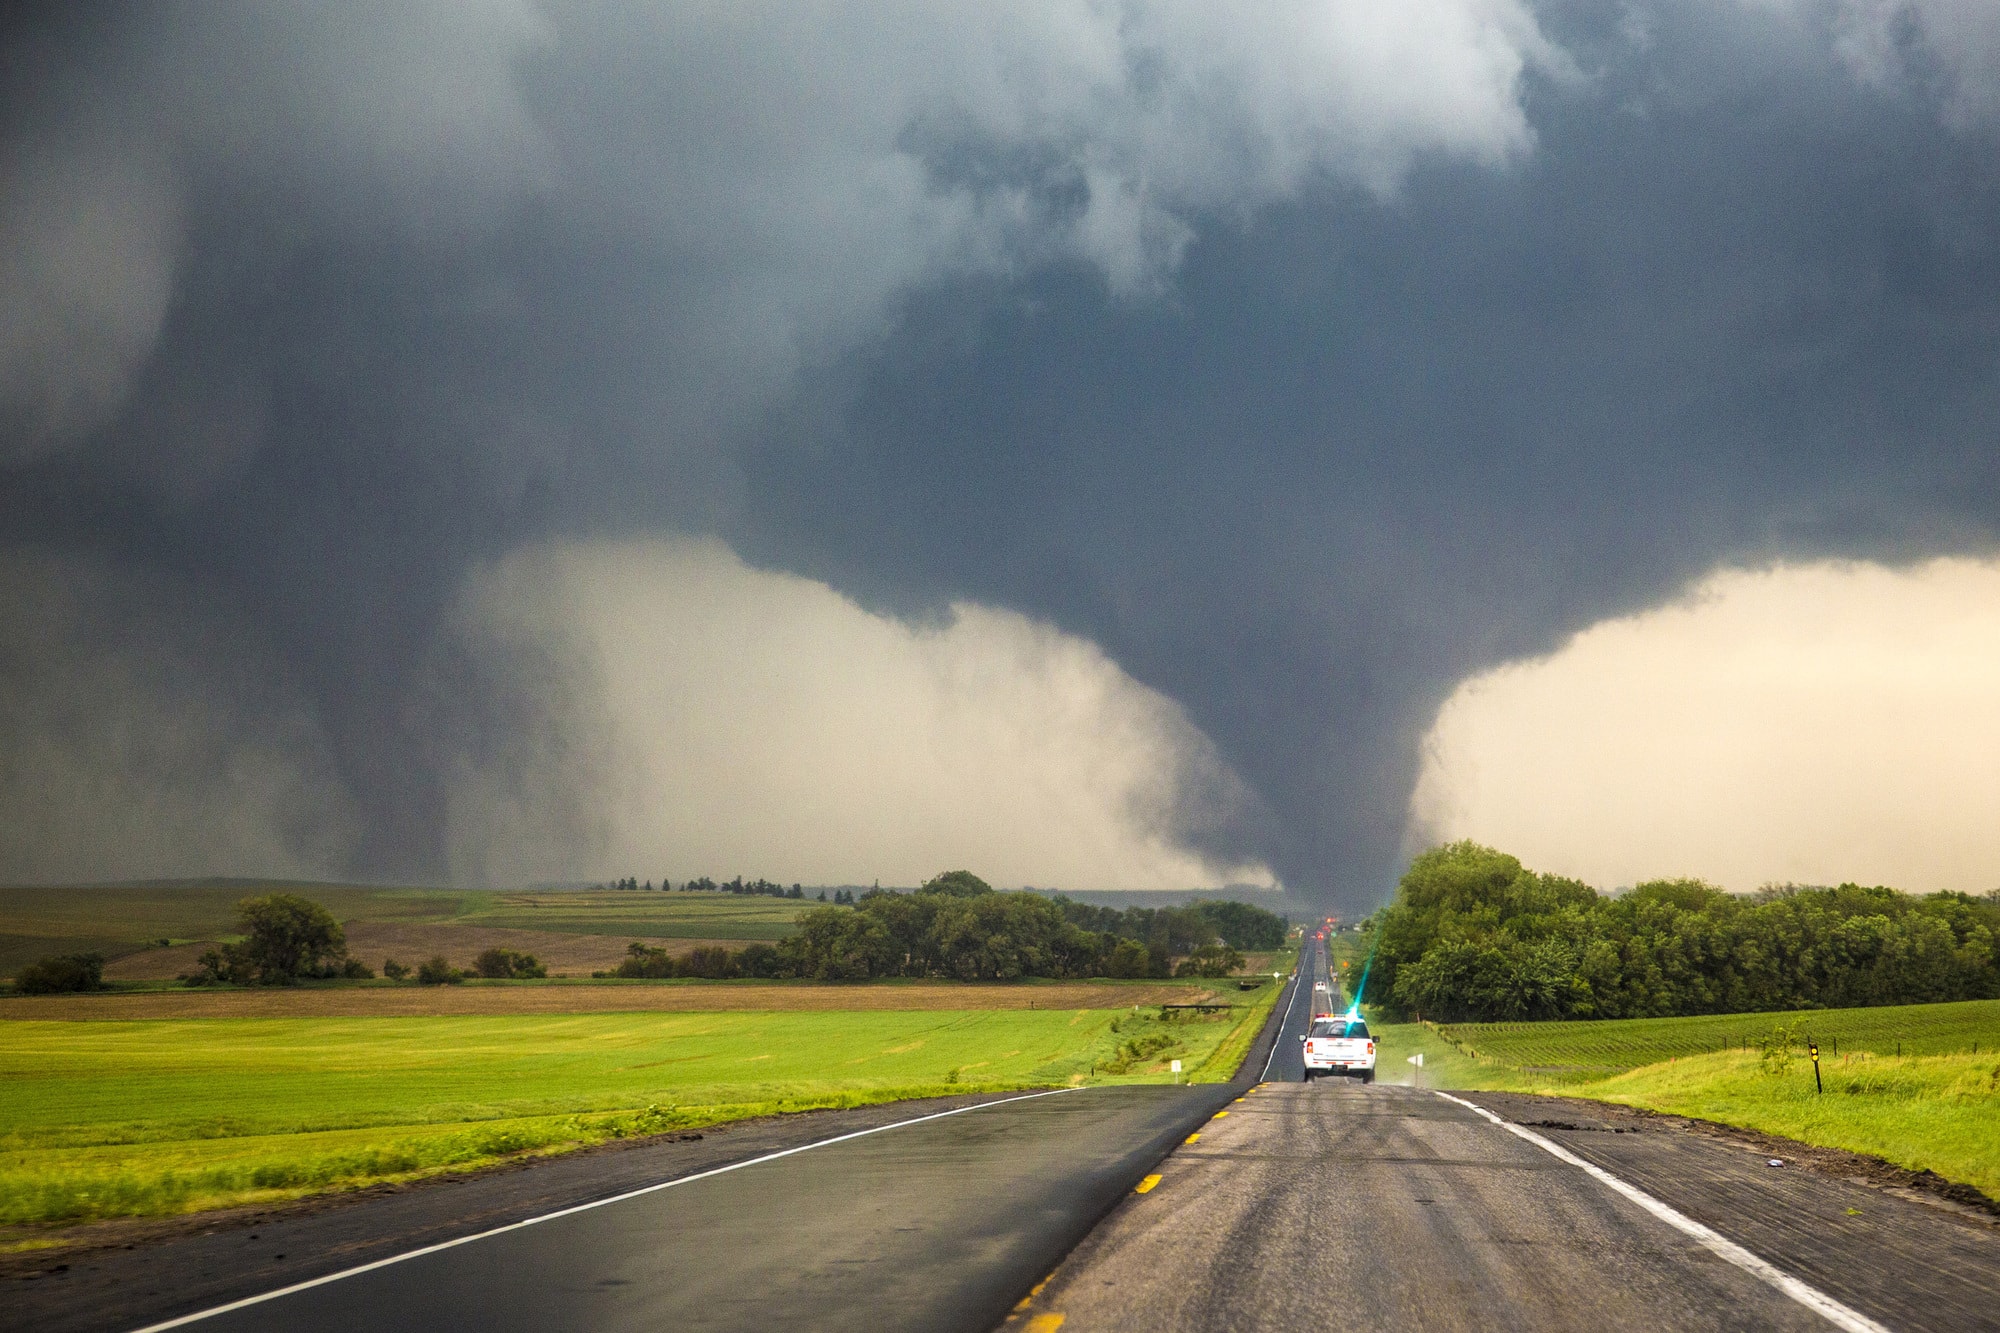 Twin tornadoes heading for my aunt's home. Image courtesy NYPost